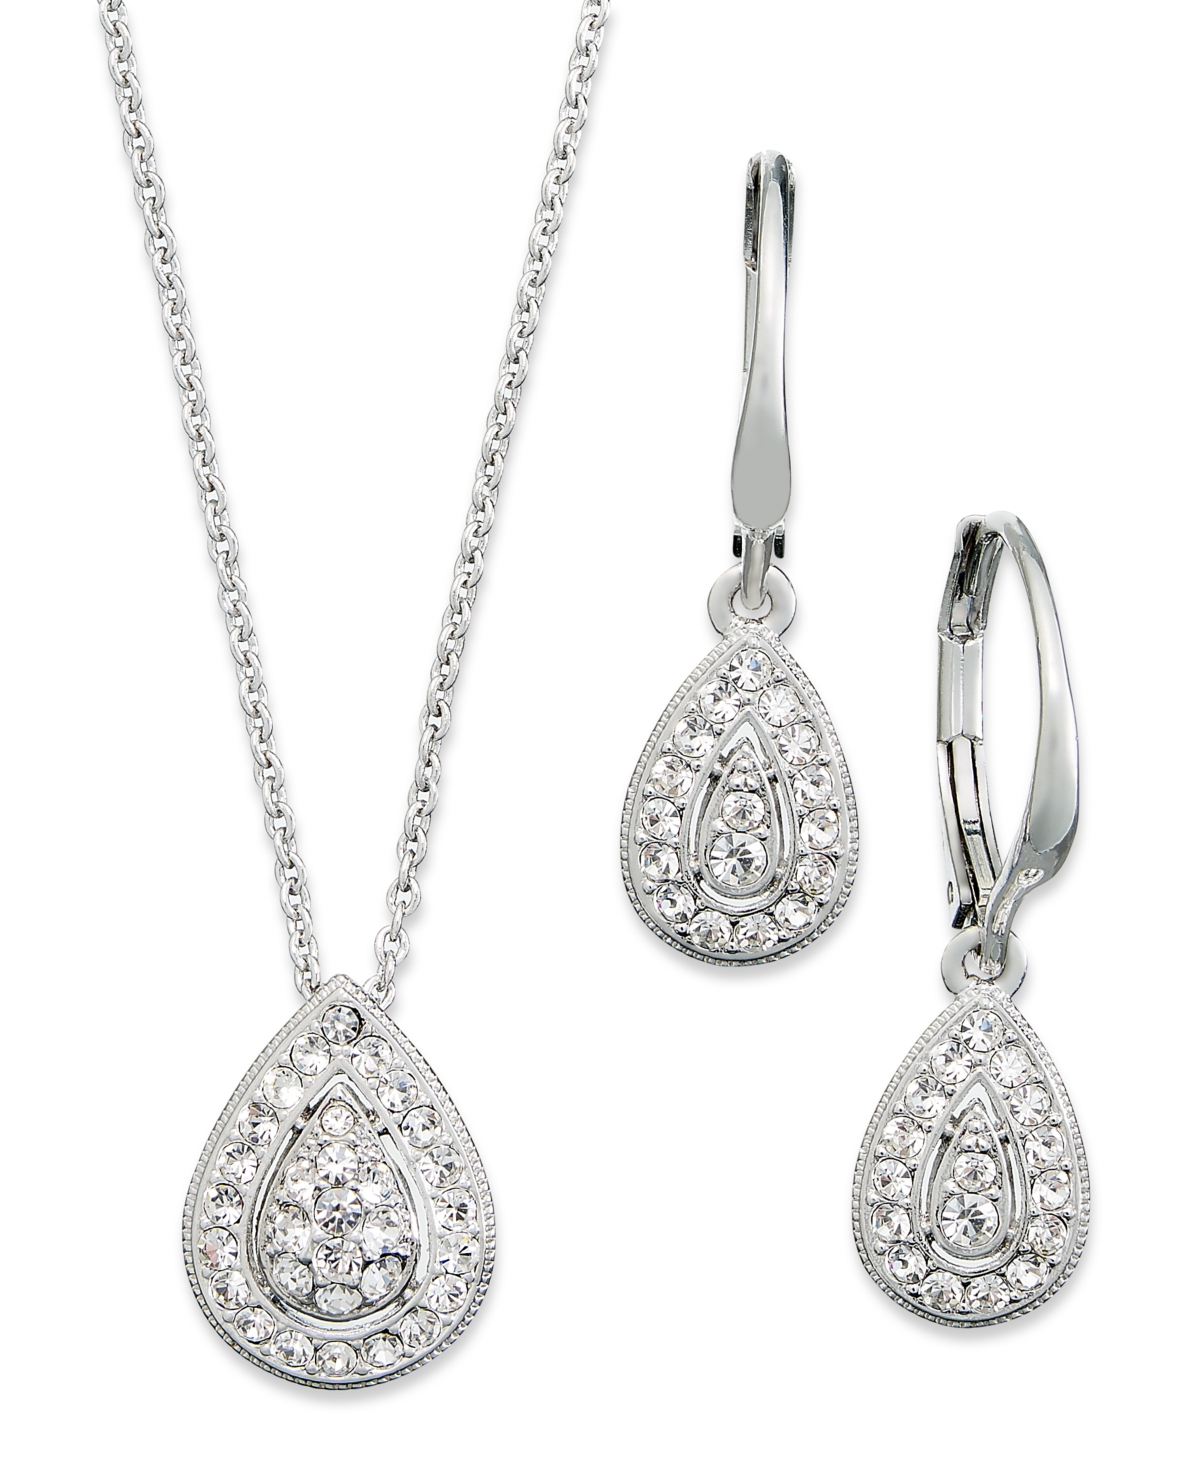 Rhodium-Plated Crystal Teardrop Earrings and Pendant Necklace Set, Created for Macy's